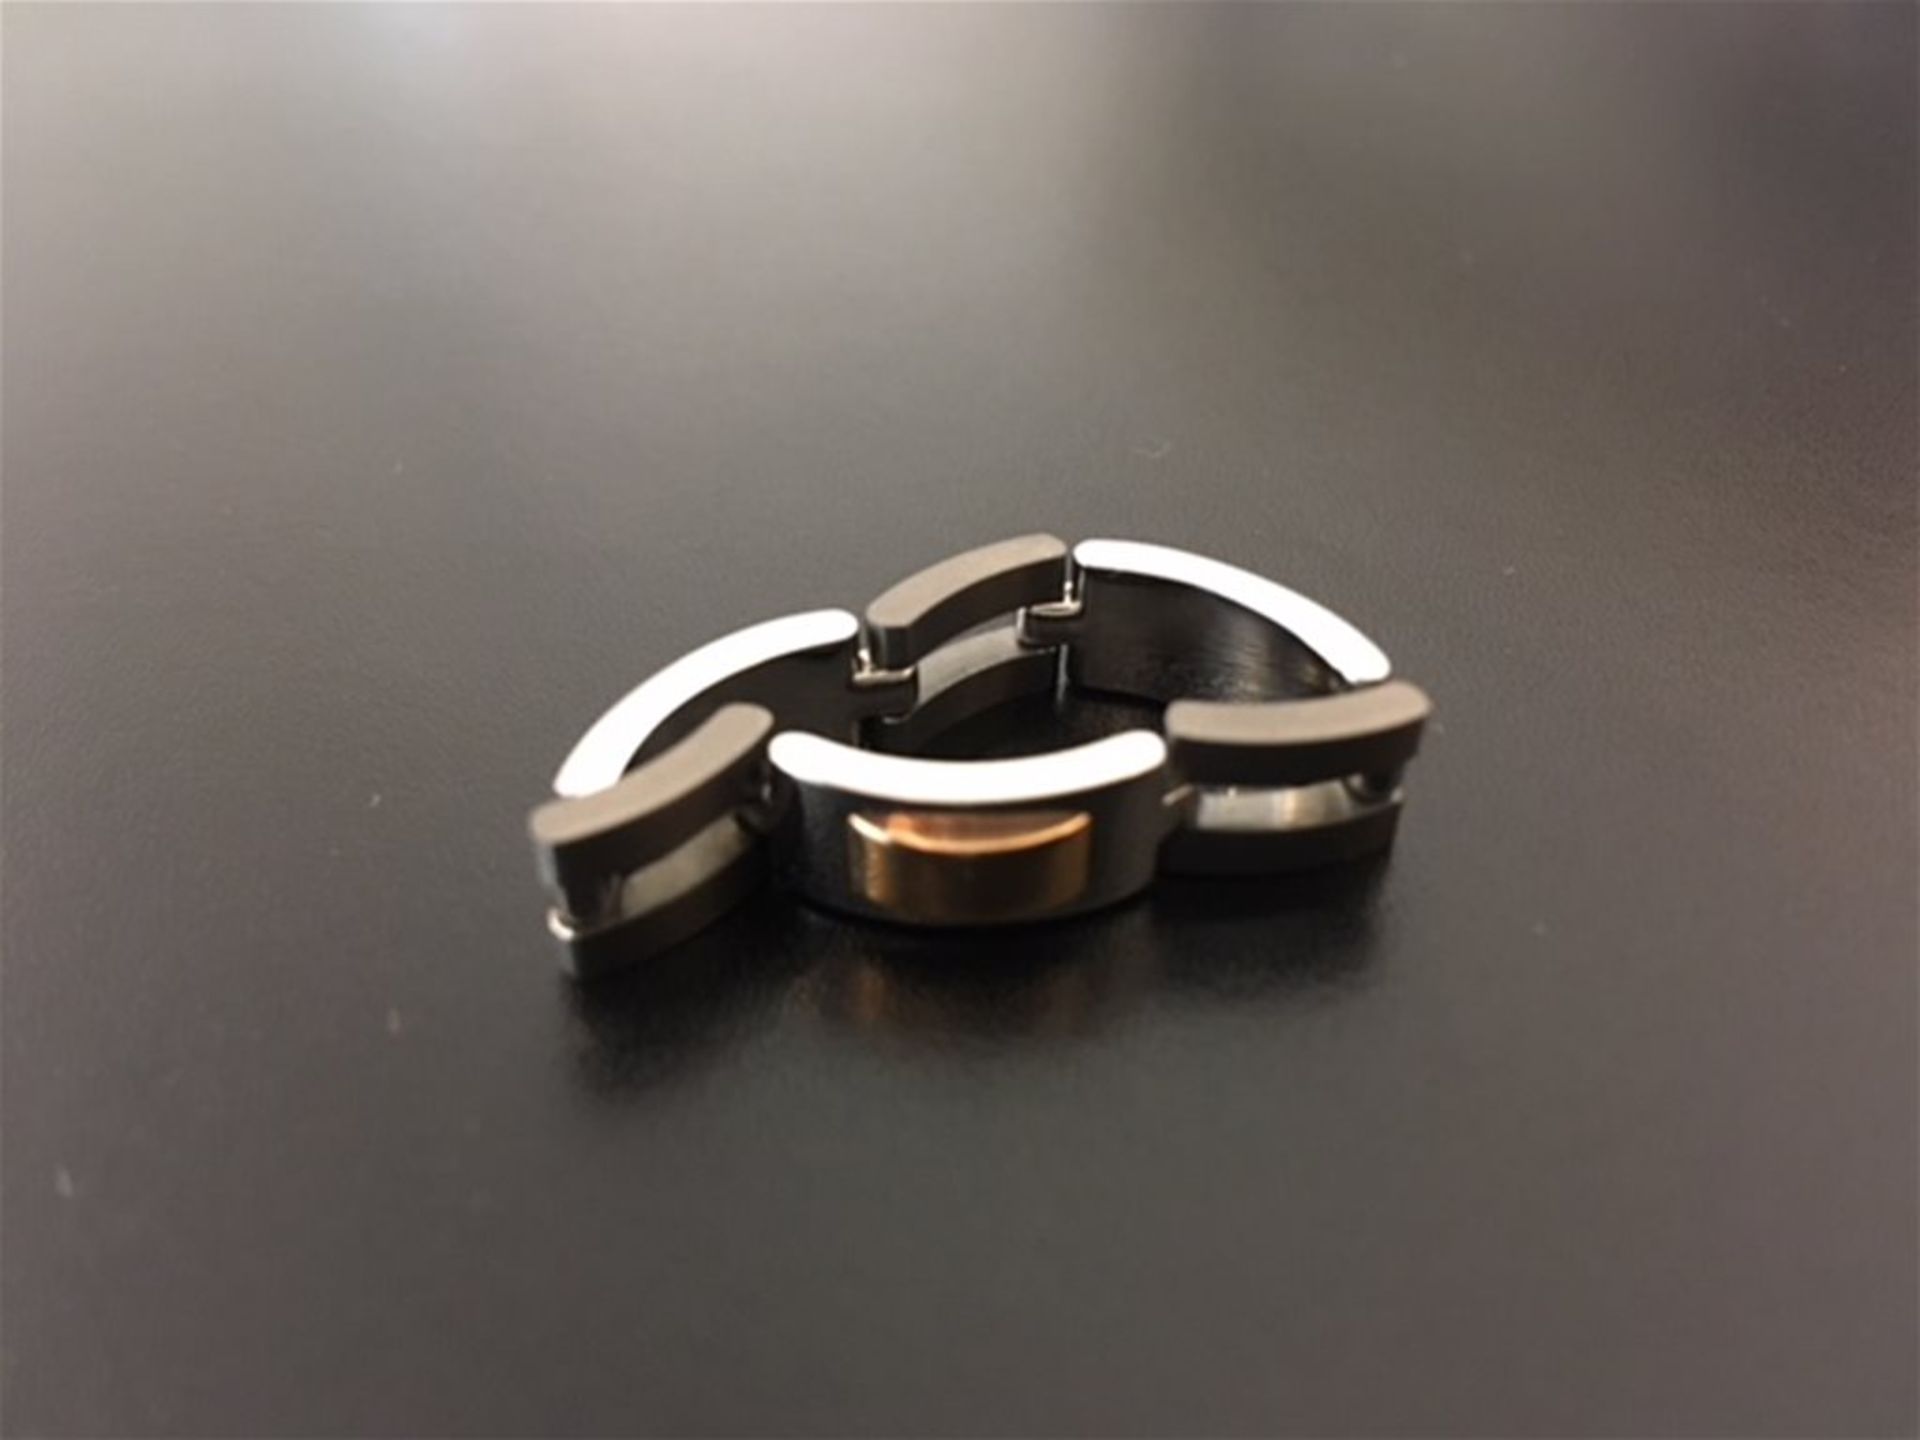 Flexible linked ring - Image 2 of 2